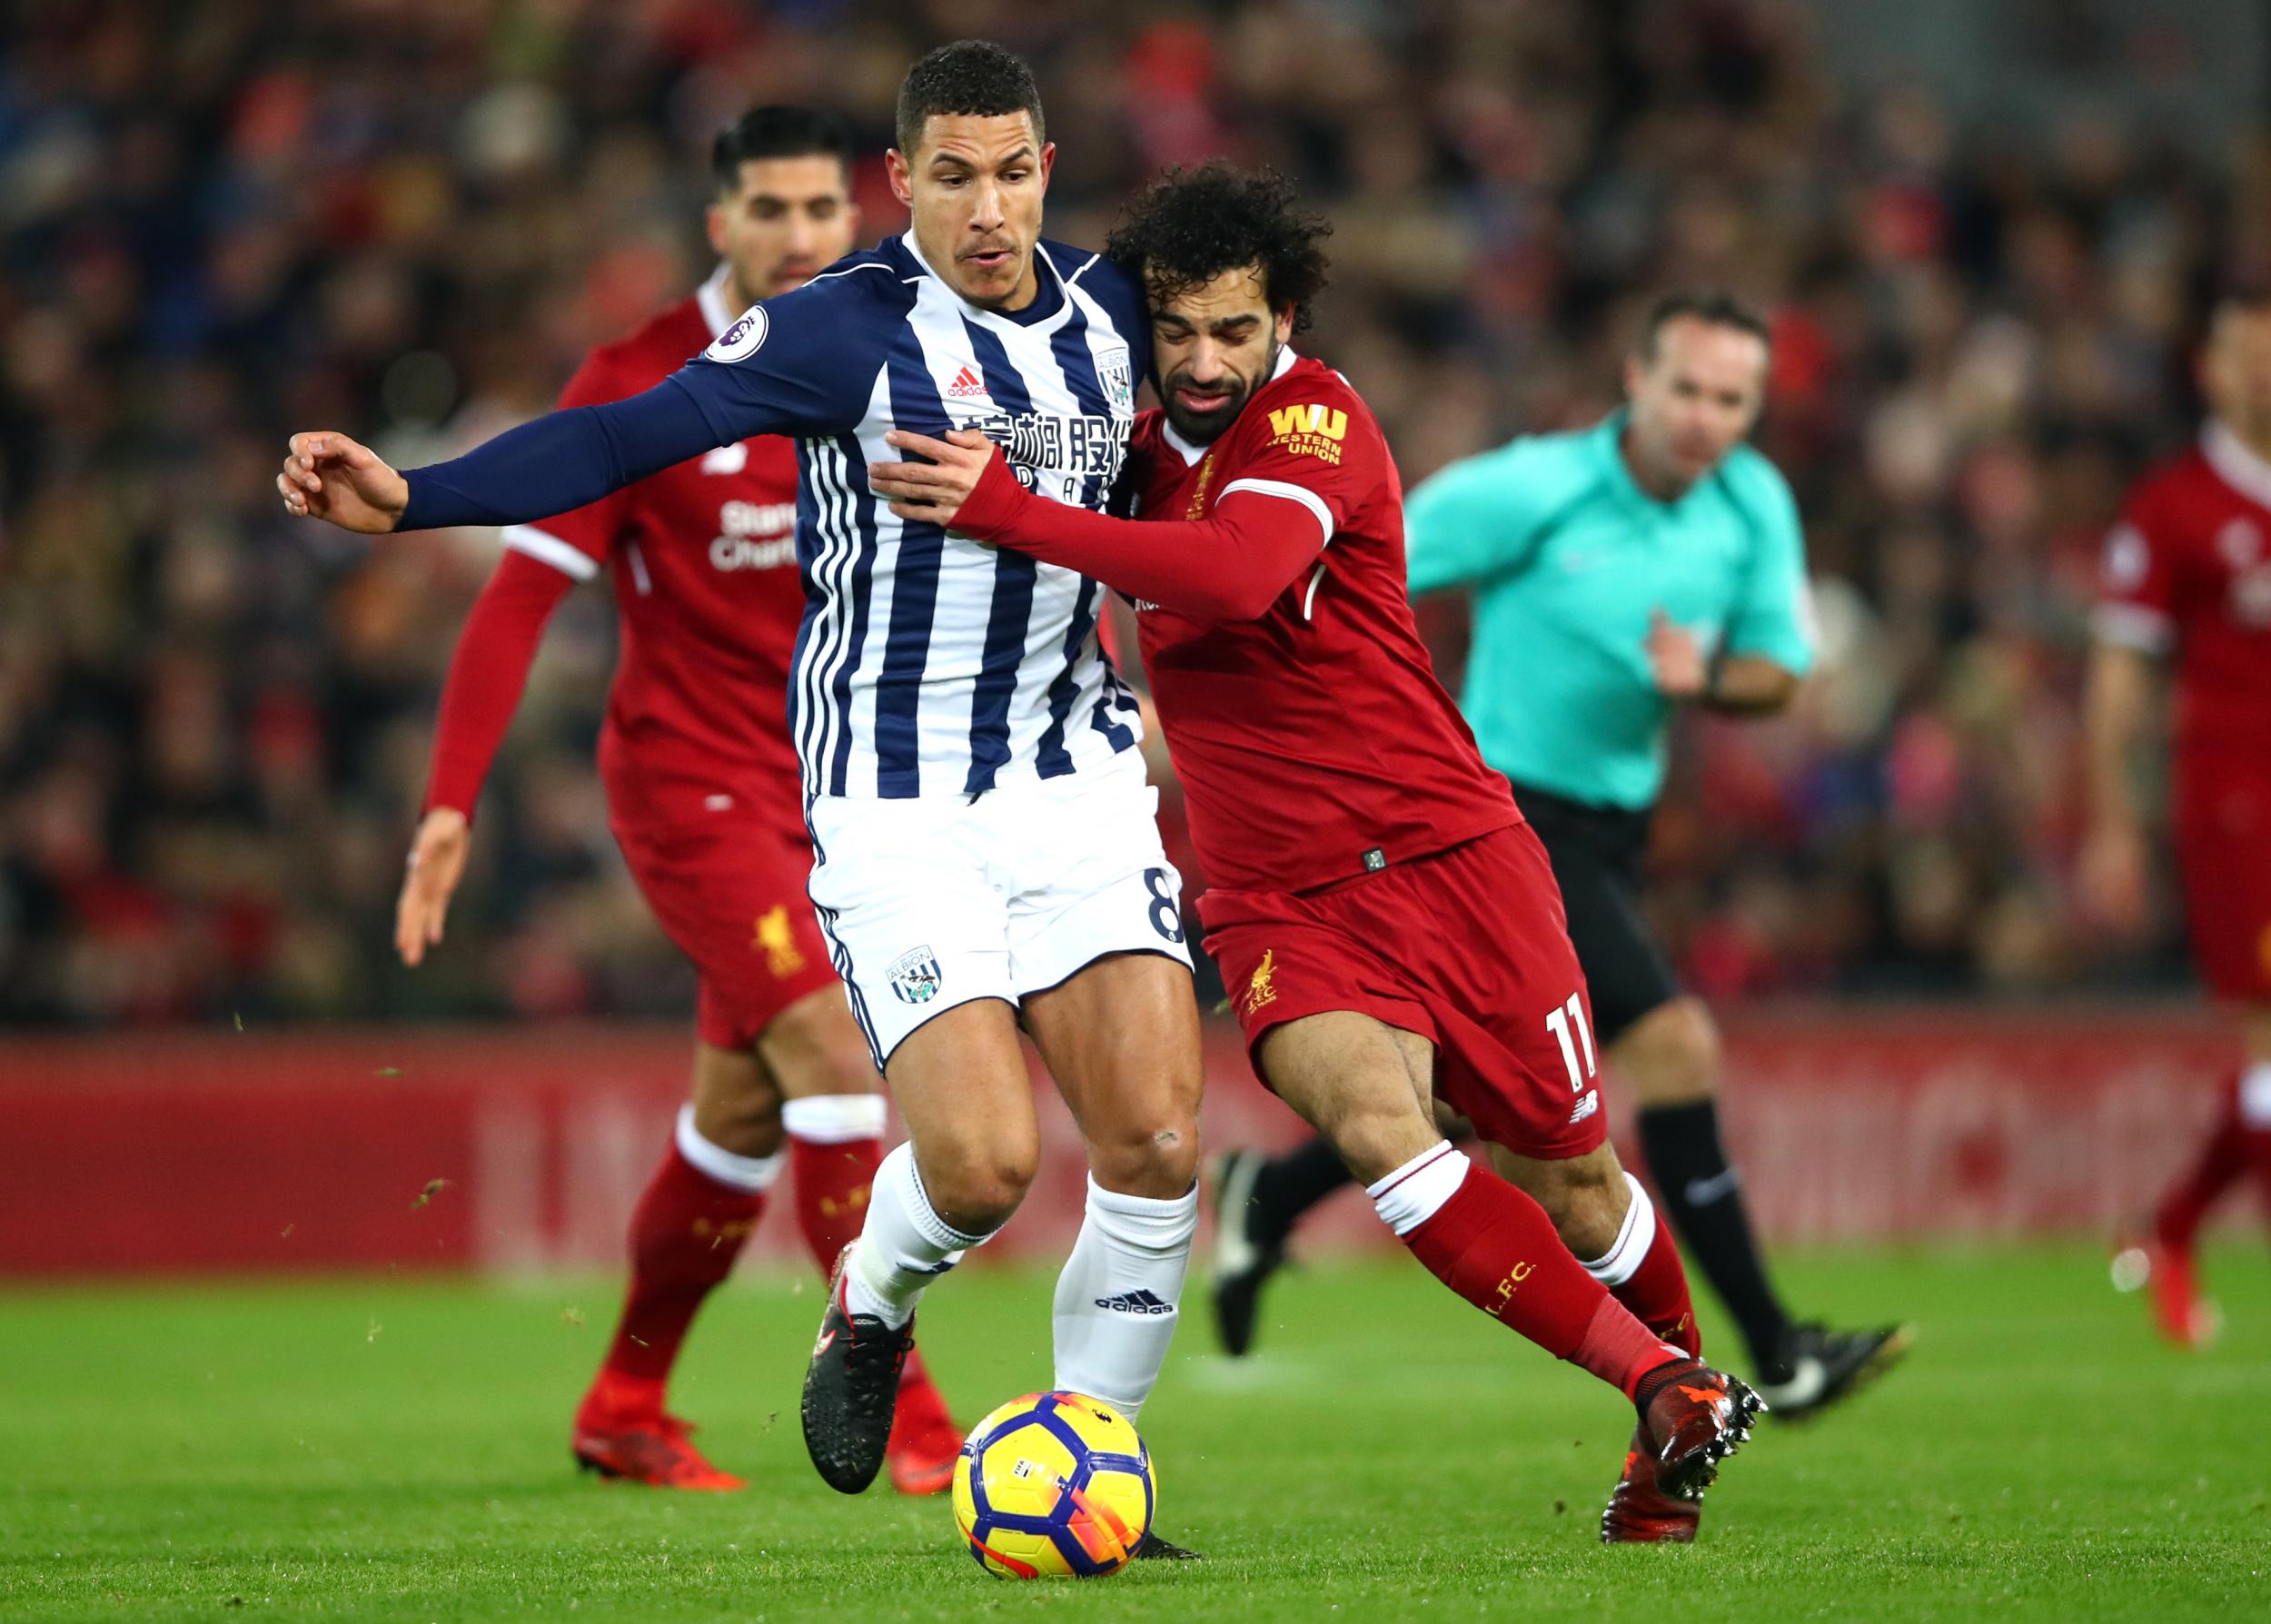 Liverpool could not break down a dogged West Bromwich Albion